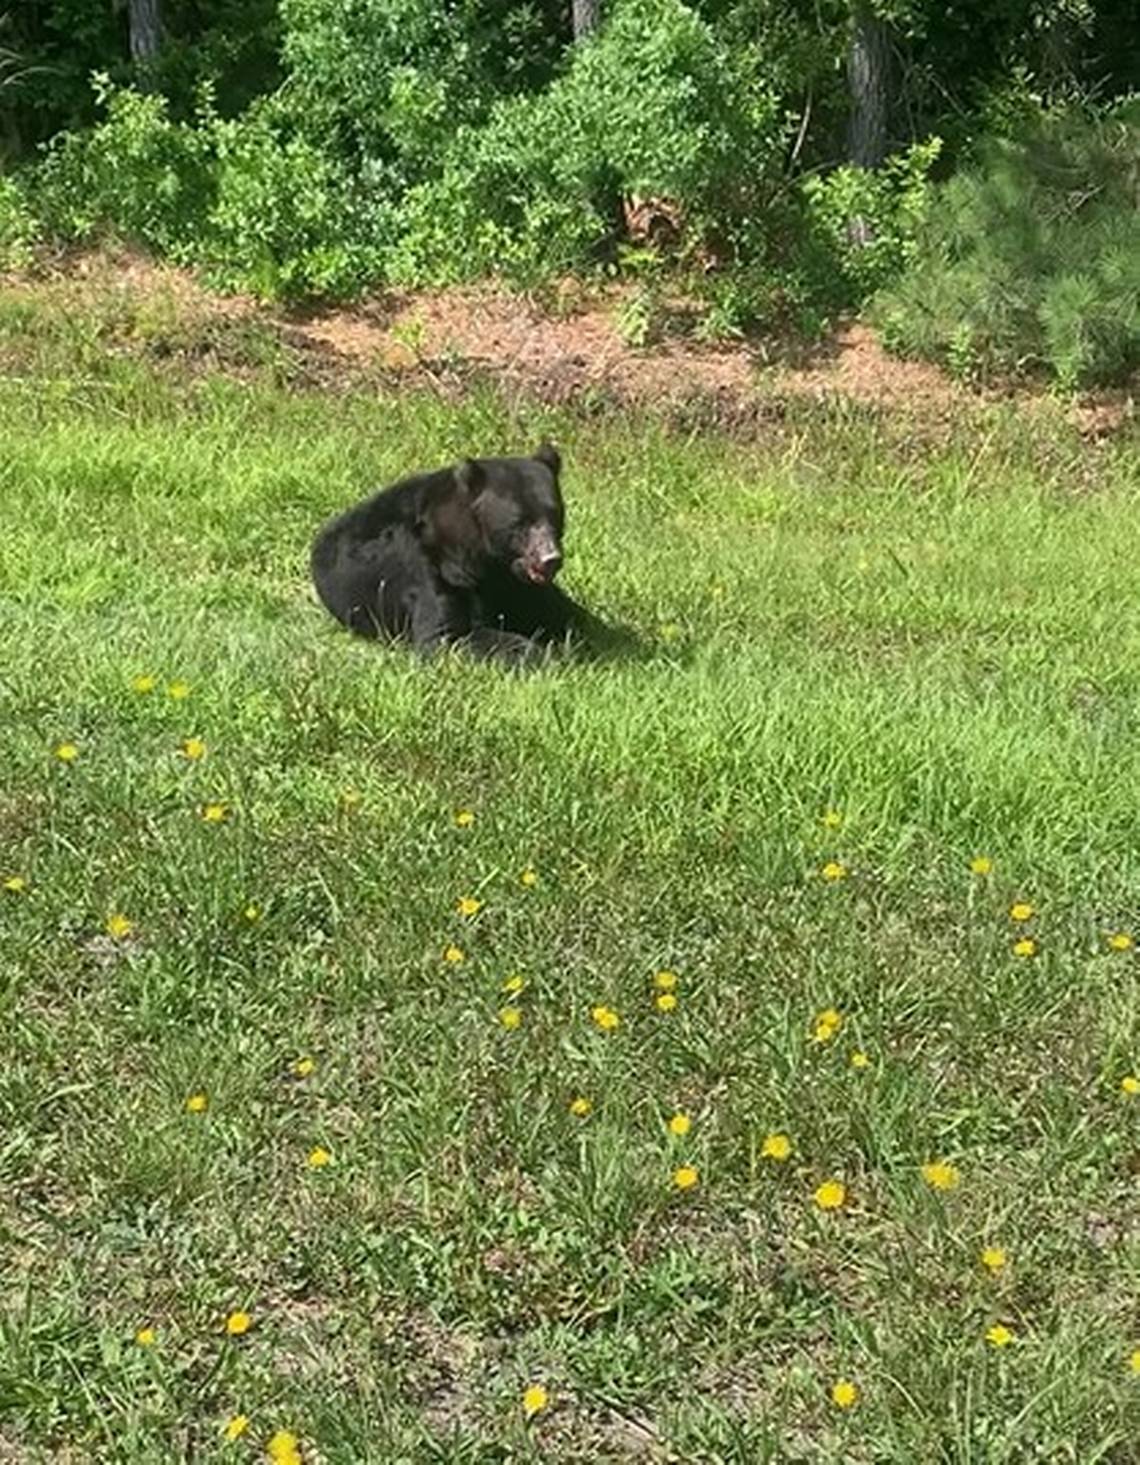 Black bear struck by vehicle on US 501 in Myrtle Beach area. Video shows injured bear.